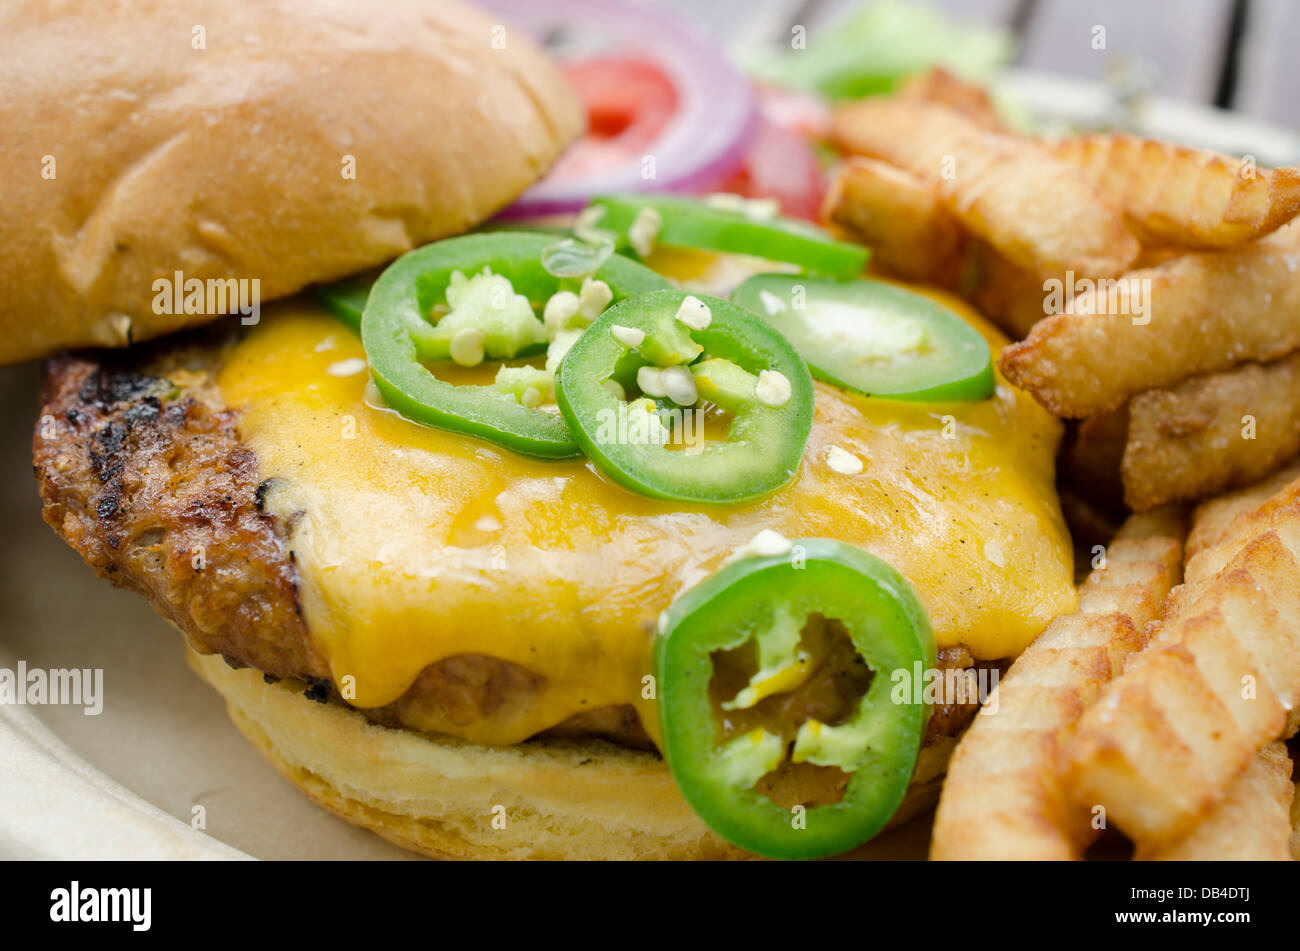 Delicious cheese burger and fries Stock Photo